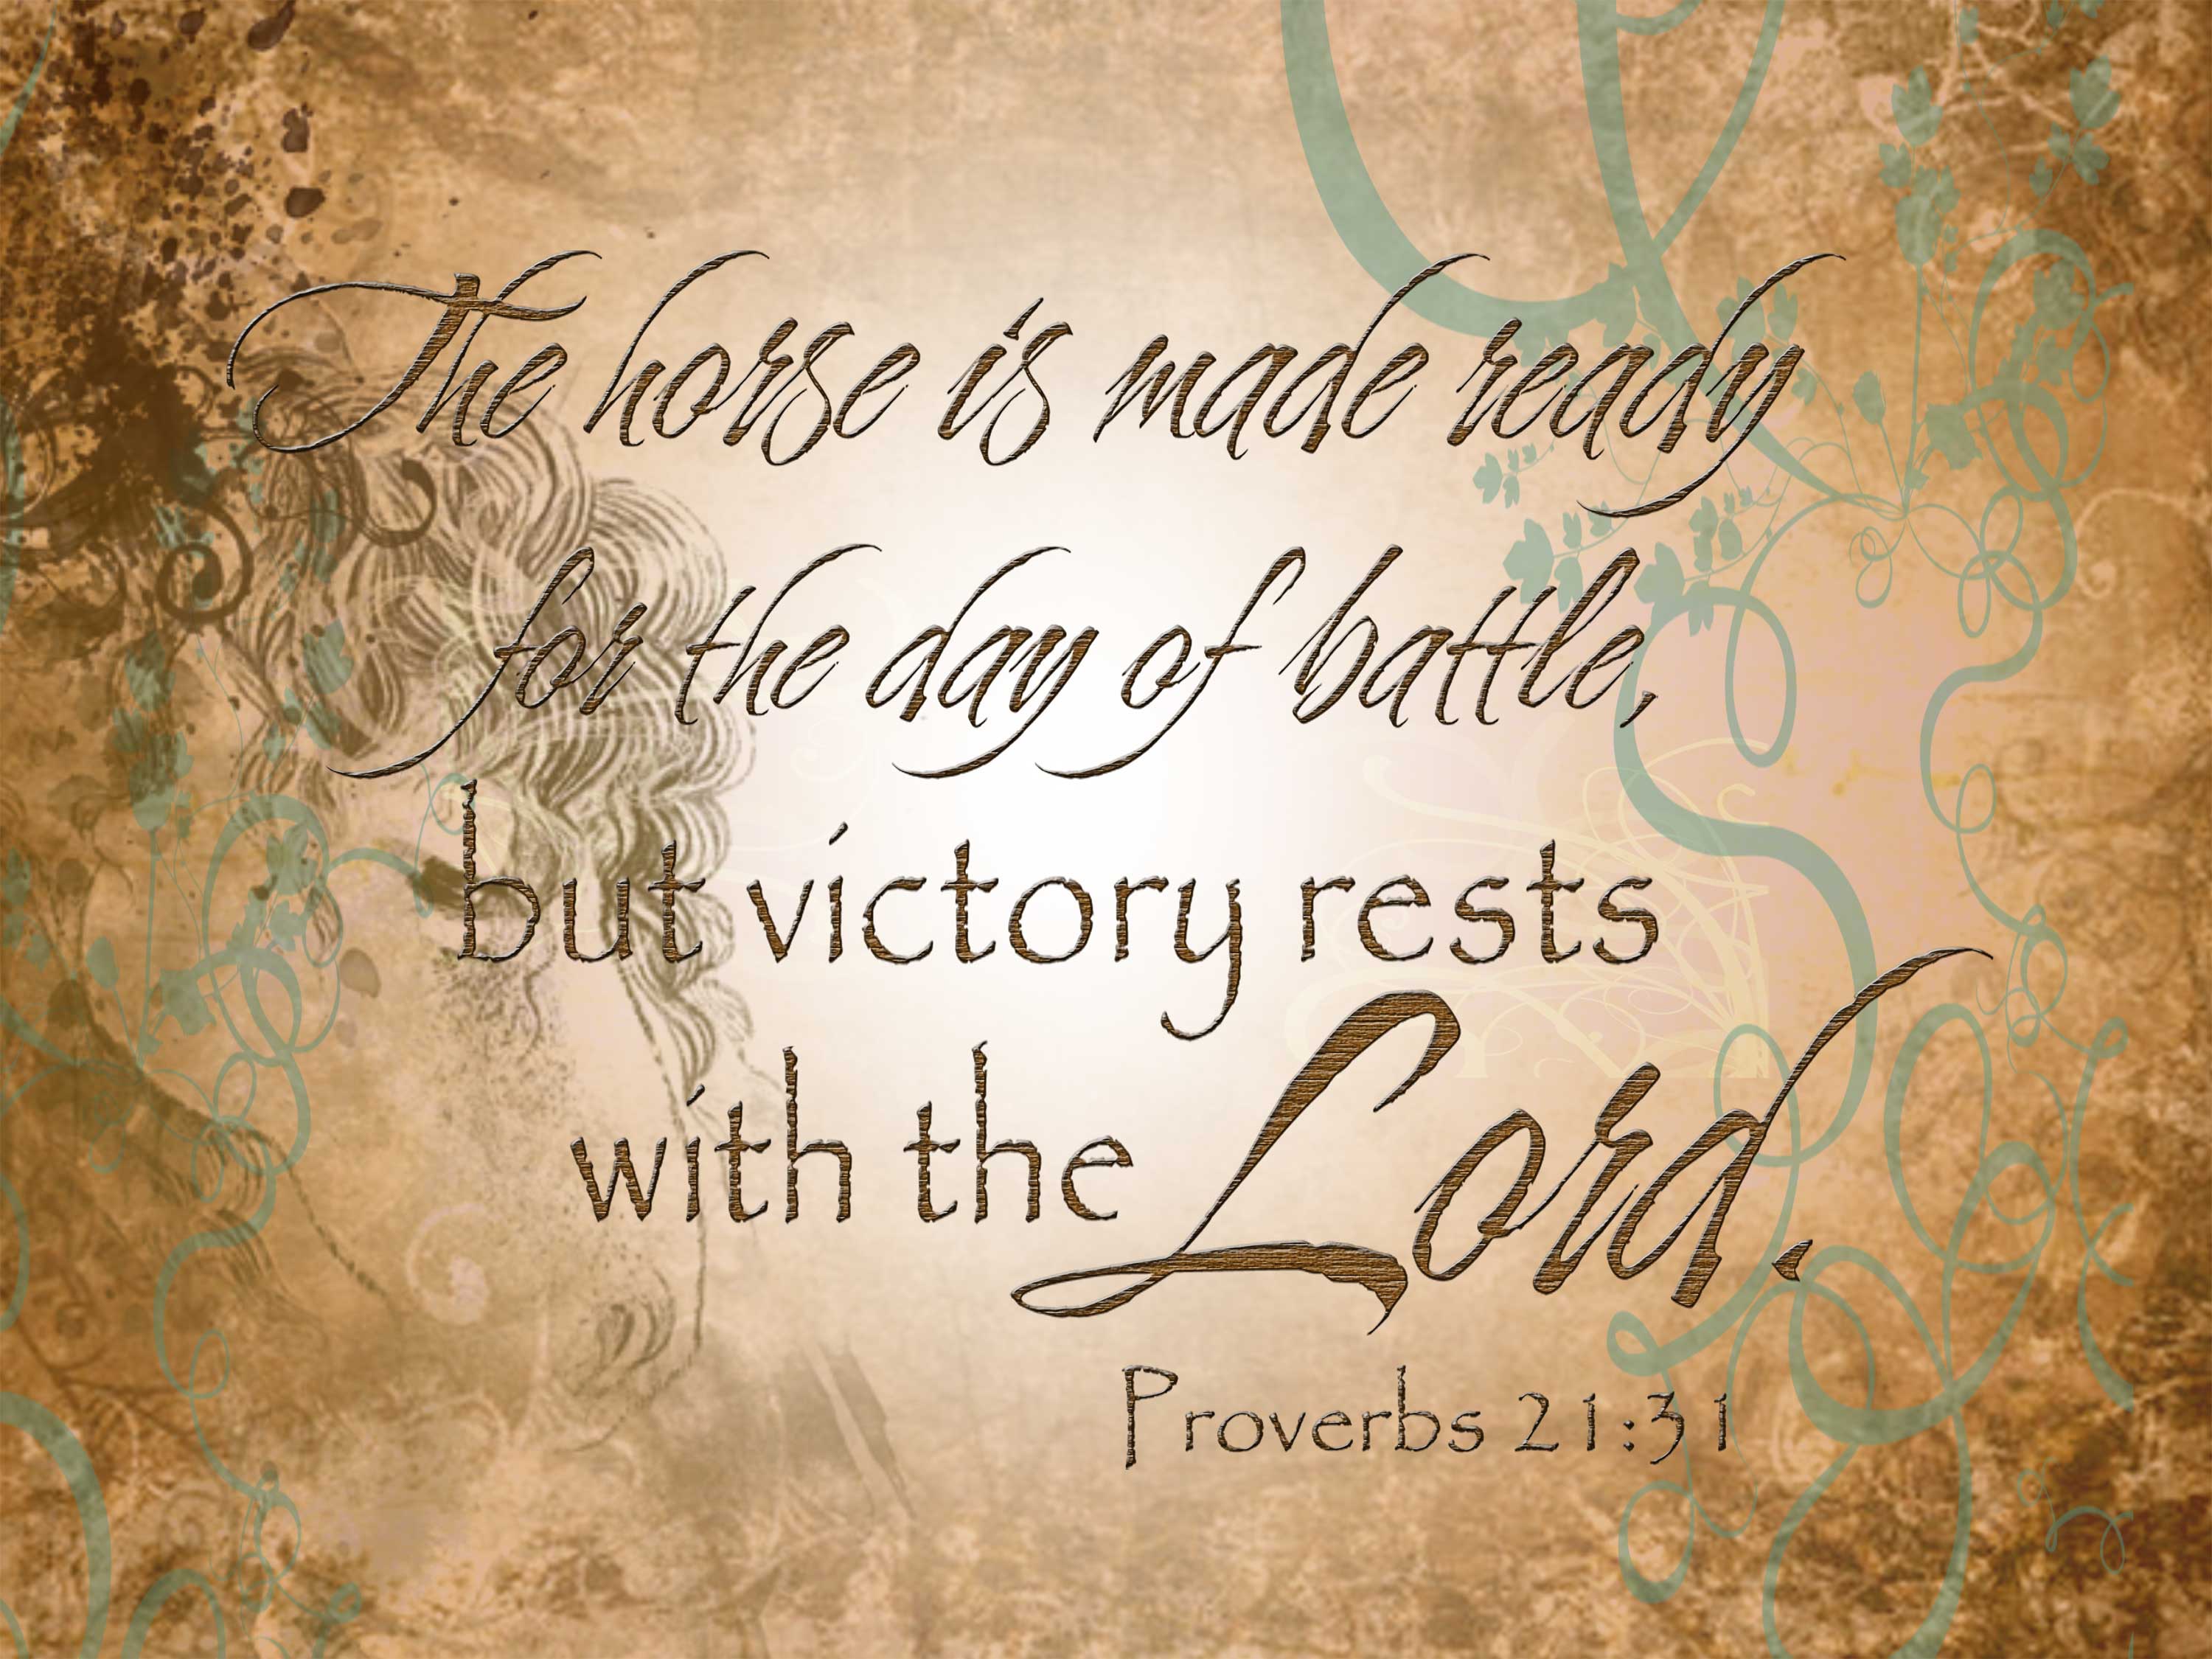 storepictures/Proverbs2131horsevictory2.jpg